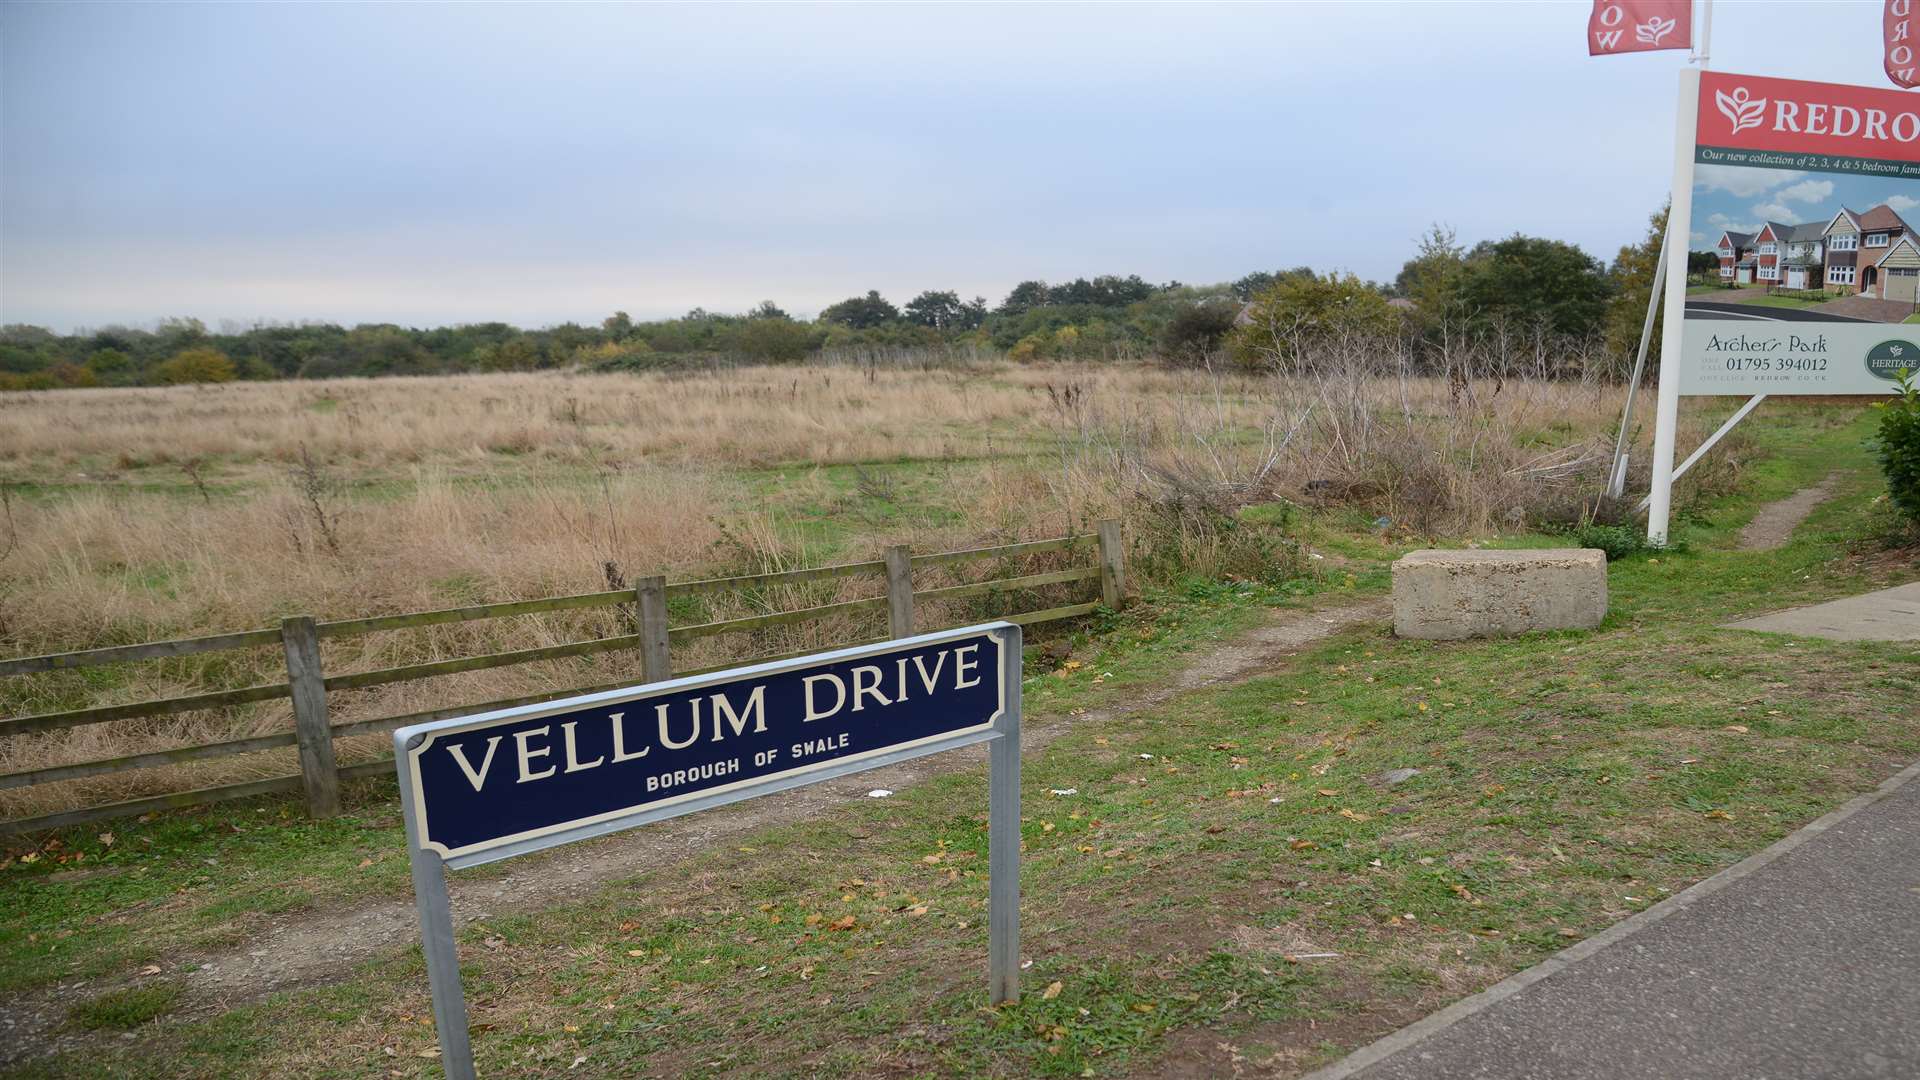 Land next to Vellum Drive and the Archers Park development in Sittingbourne